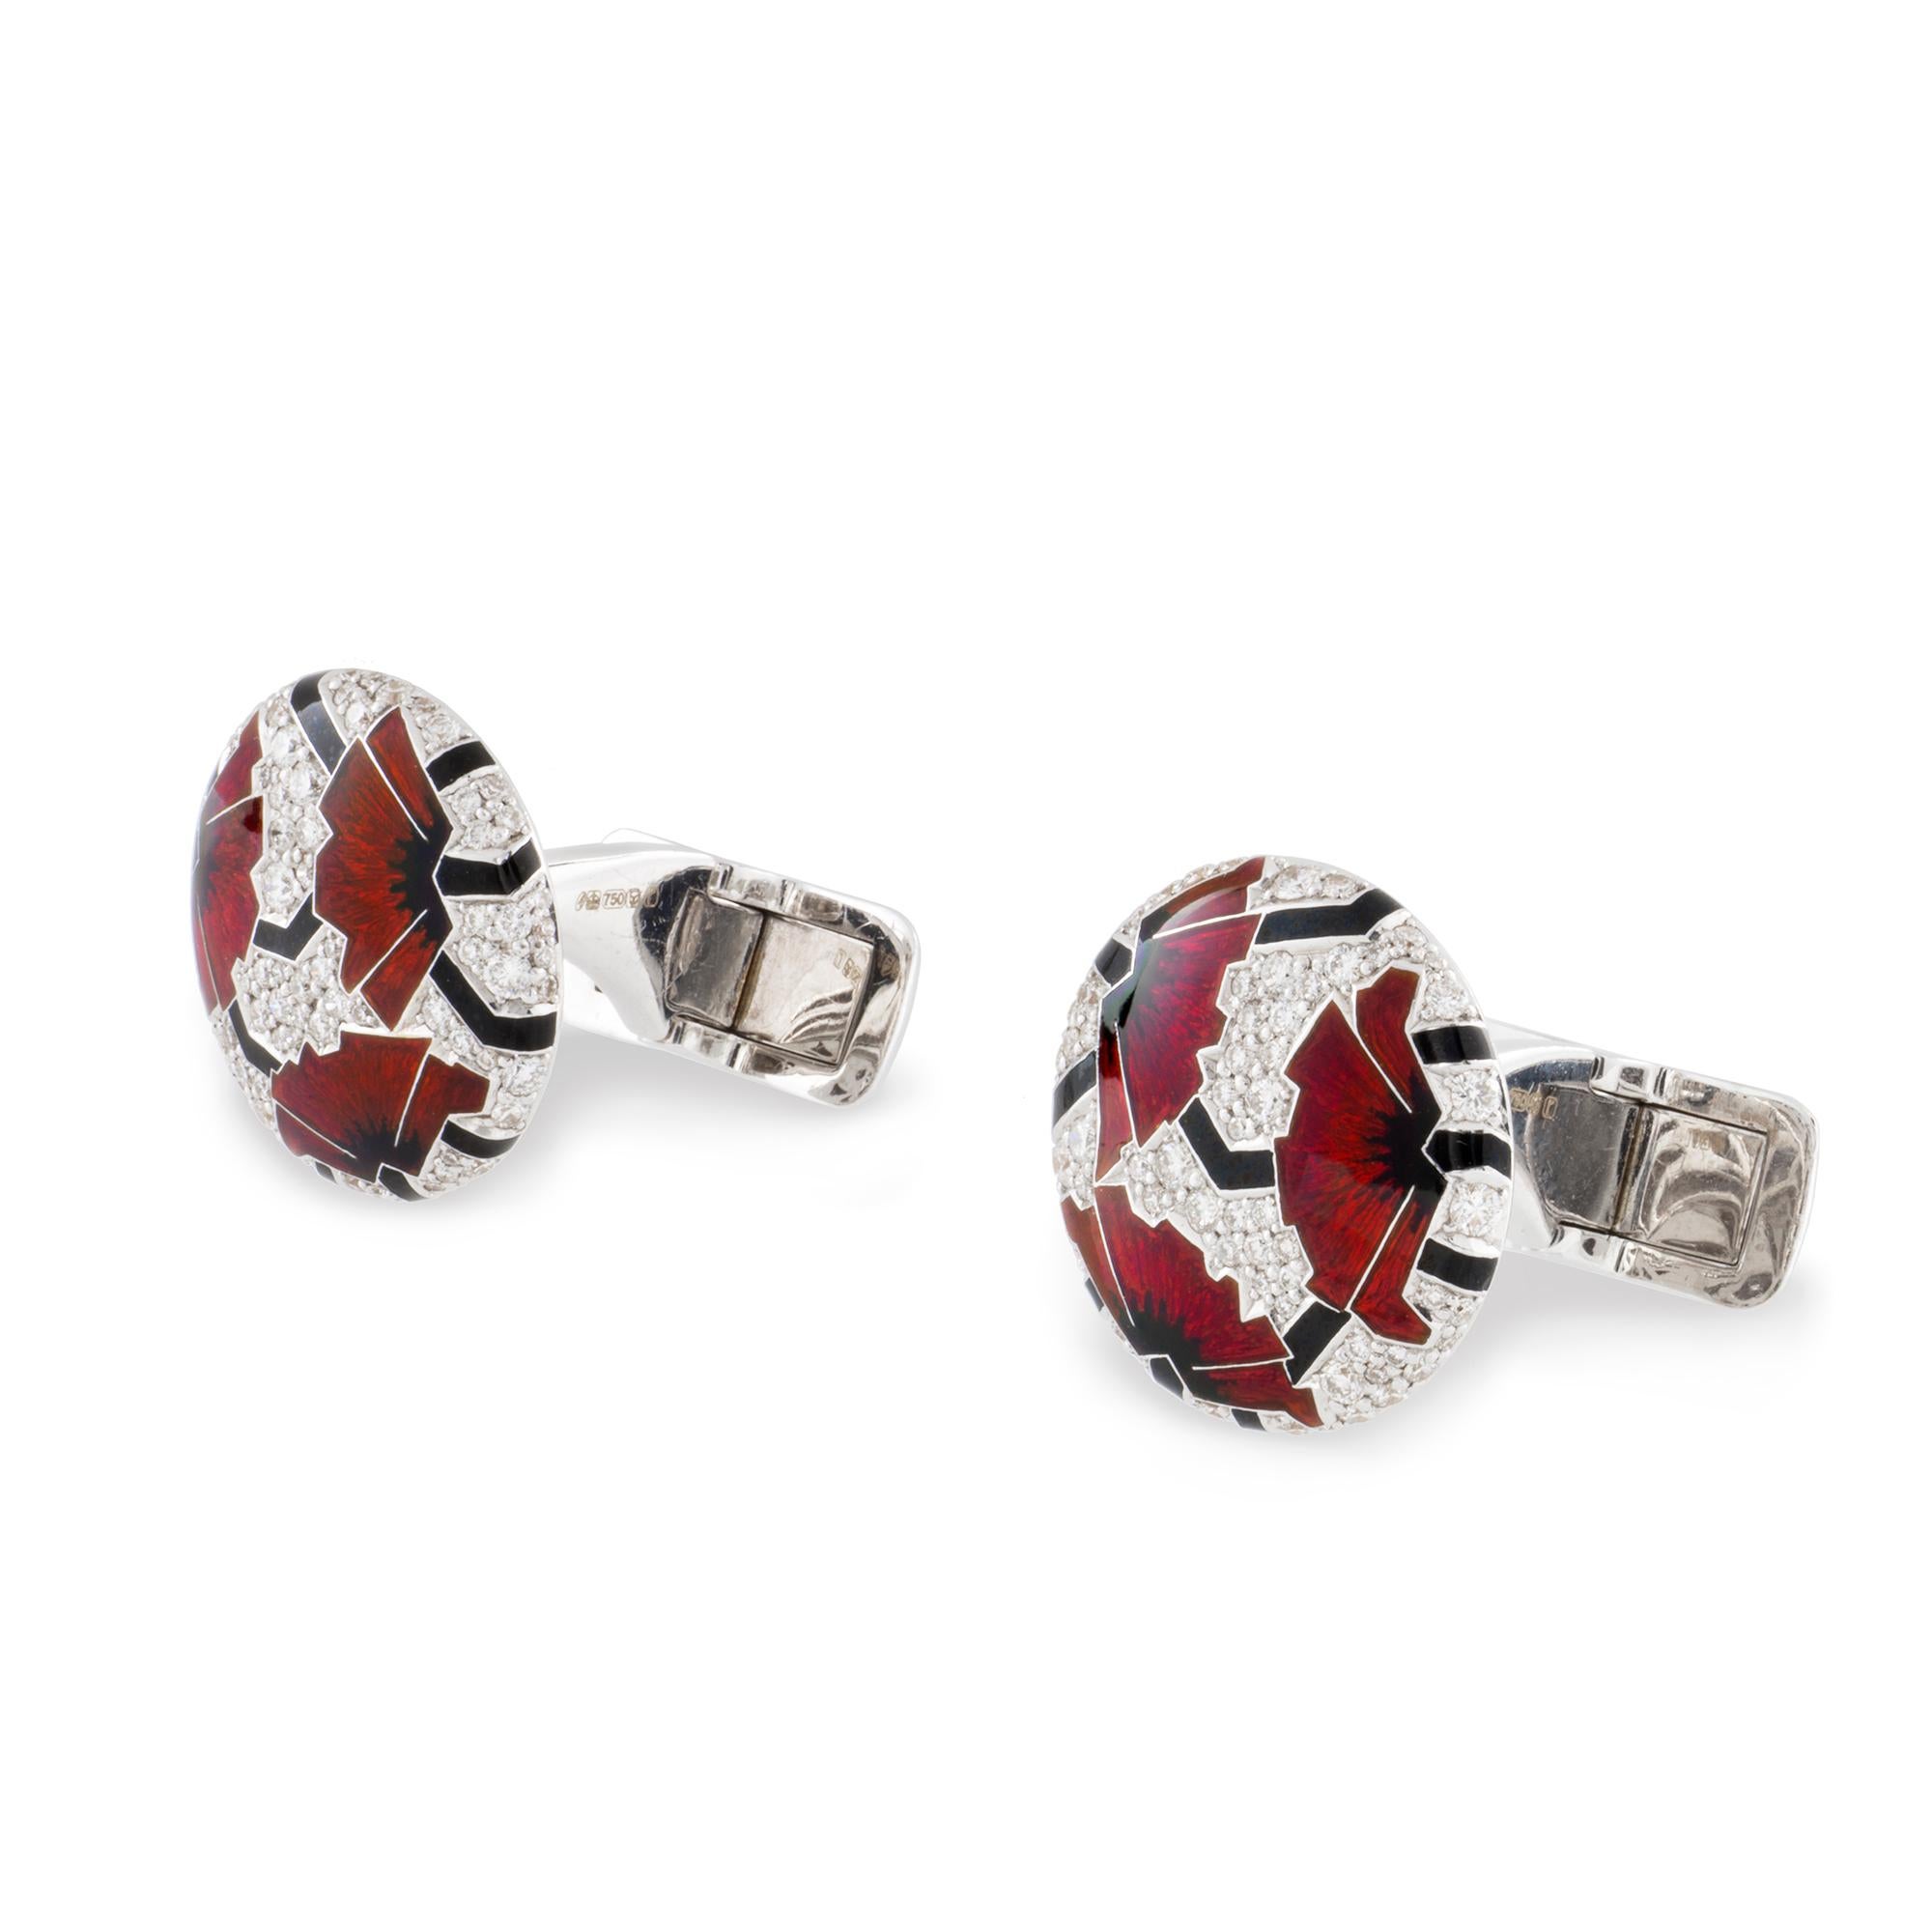 A pair of red poppies art-deco style cufflinks by Ilgiz F, each cufflink with three poppies with champlevé enamelled petals and hot enamelled peduncles, on a diamond pave-set background of round shape, the diamonds weighing 2.28 carats in total, all